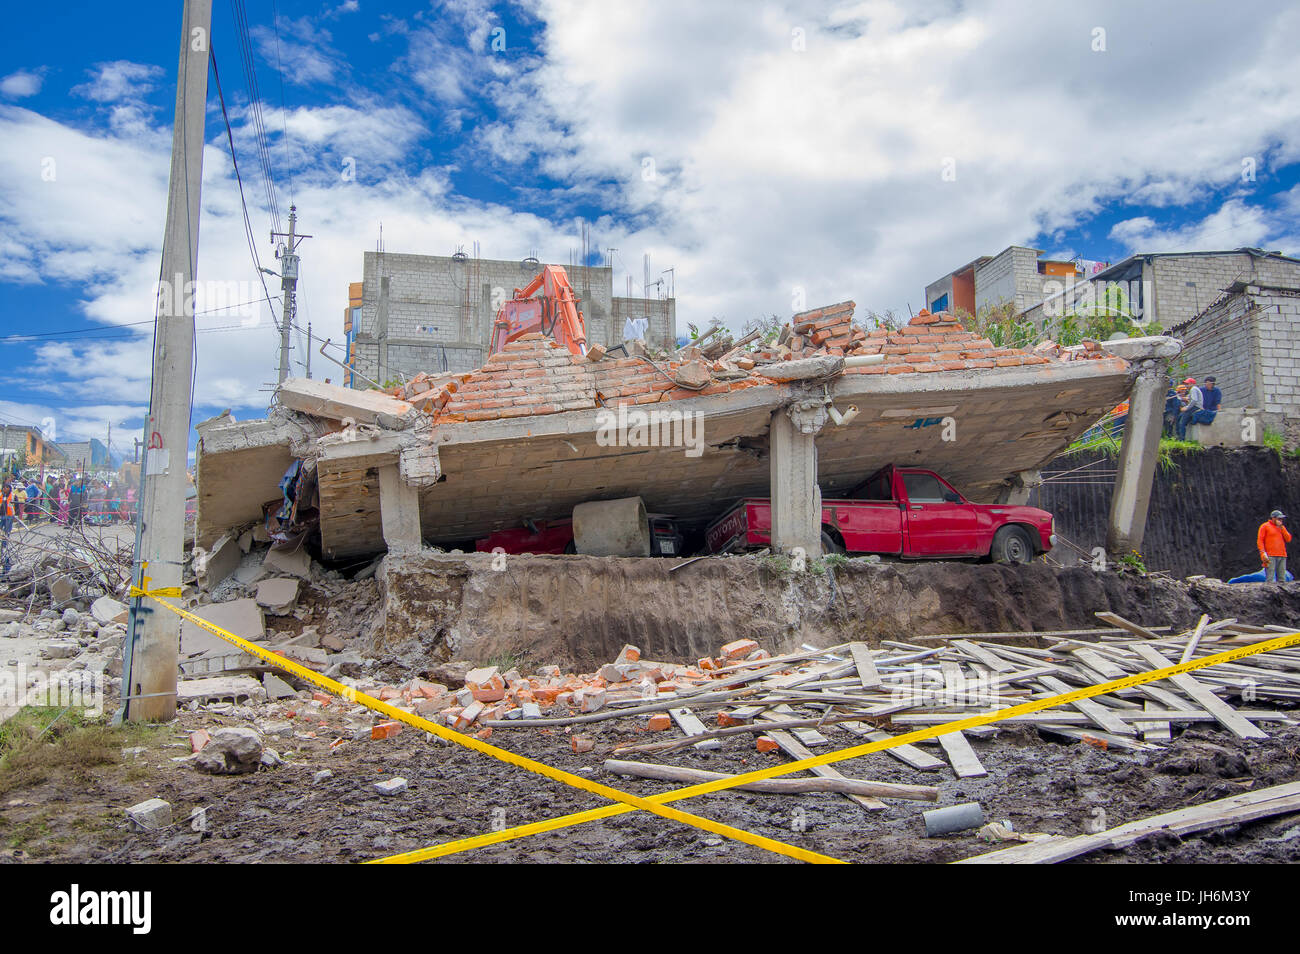 Quito, Ecuador - April,17, 2016: House destroyed by Earthquake, with a red car caught under the destroyed construction, and heavy machinery cleaning t Stock Photo